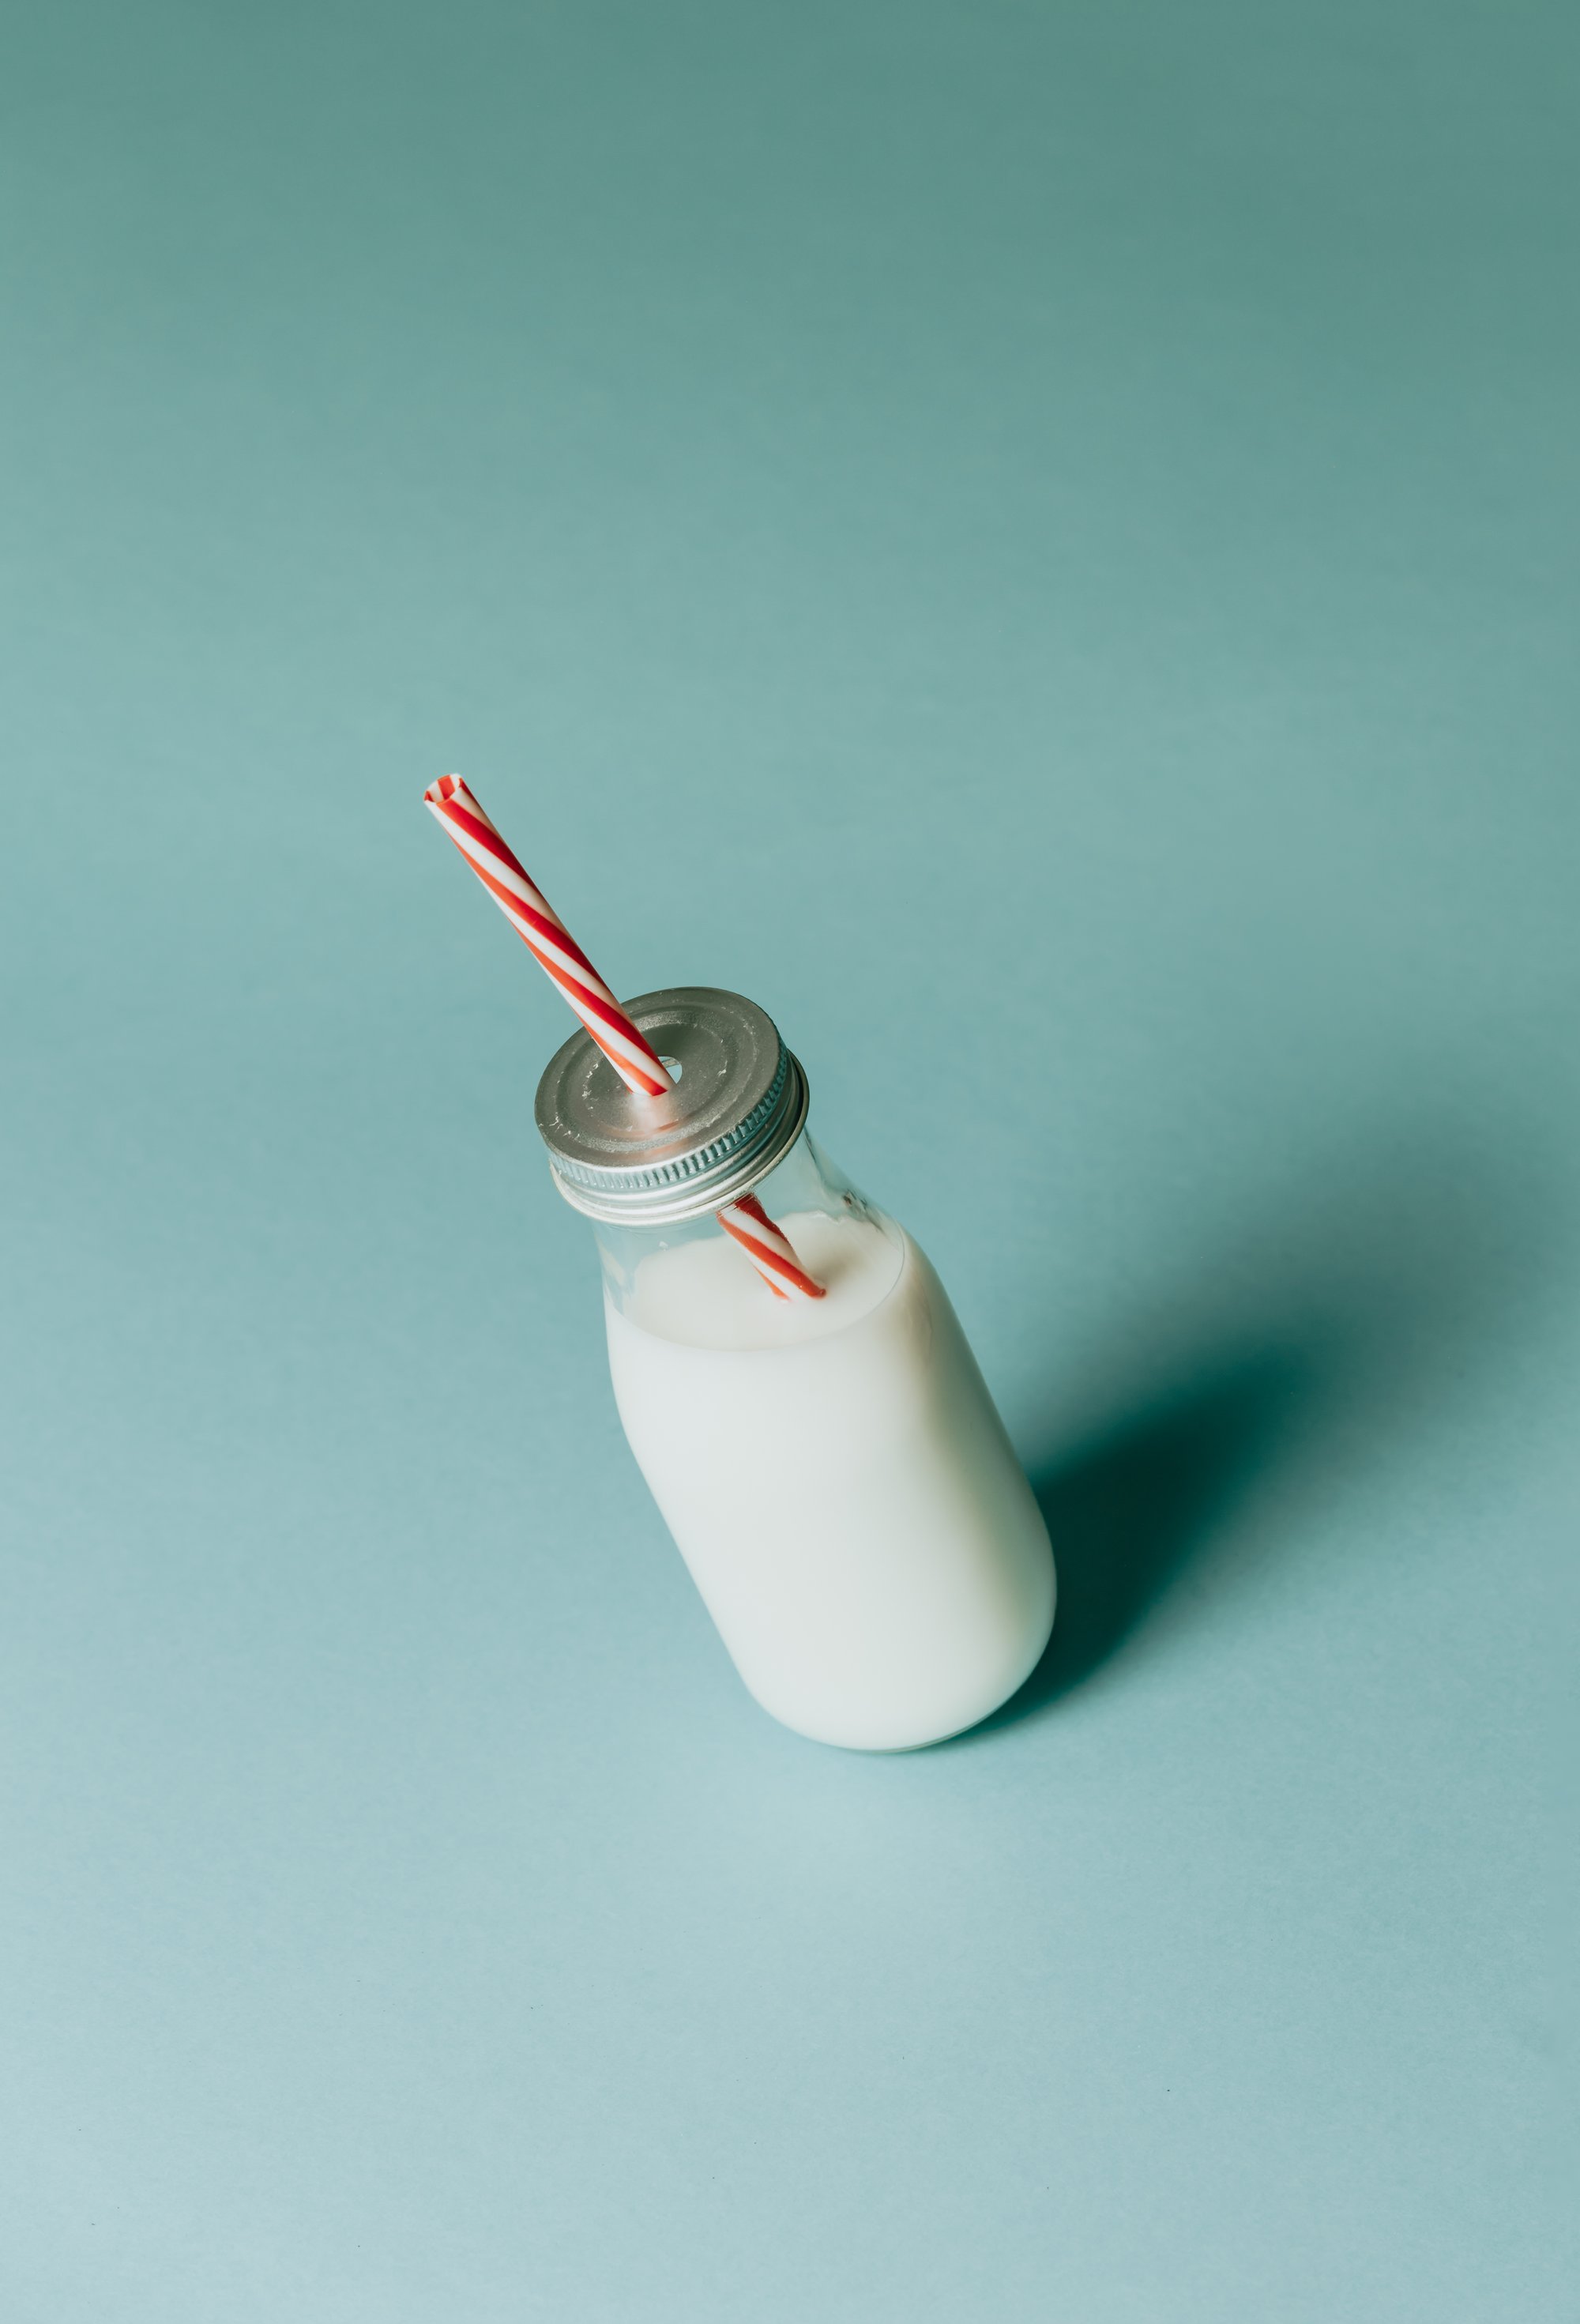 bottle of milk with silver lid and red striped straw 一瓶银色盖子和红条纹稻草的牛奶